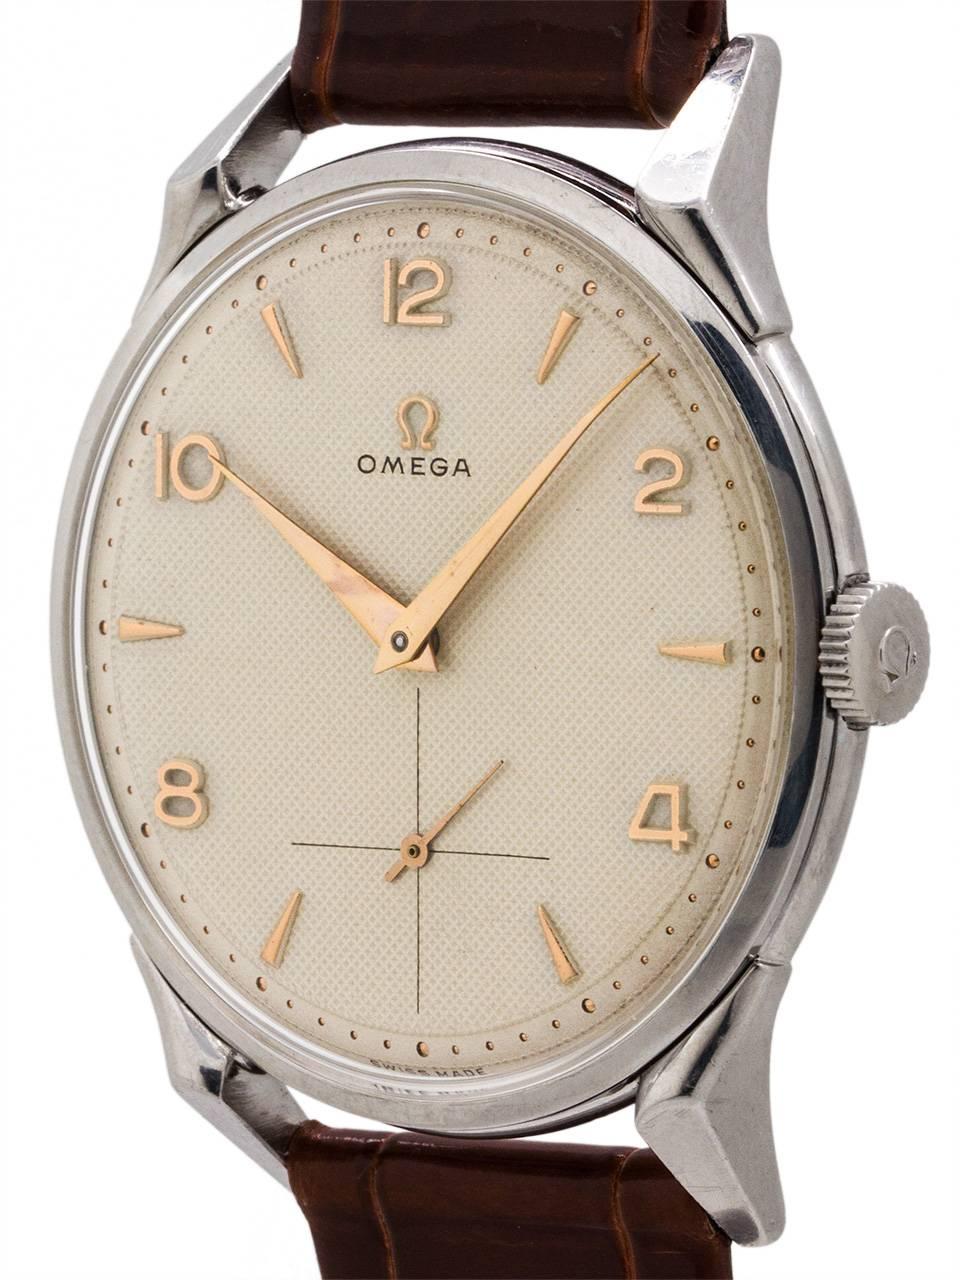 Vintage Omega stainless steel manual wind dress model ref 2603.12 with movement serial # 14.2 million circa 1954. Featuring large 37 x 45mm case with substantial grass hopper lugs, heavy snap back case, acrylic crystal, and very pleasing original